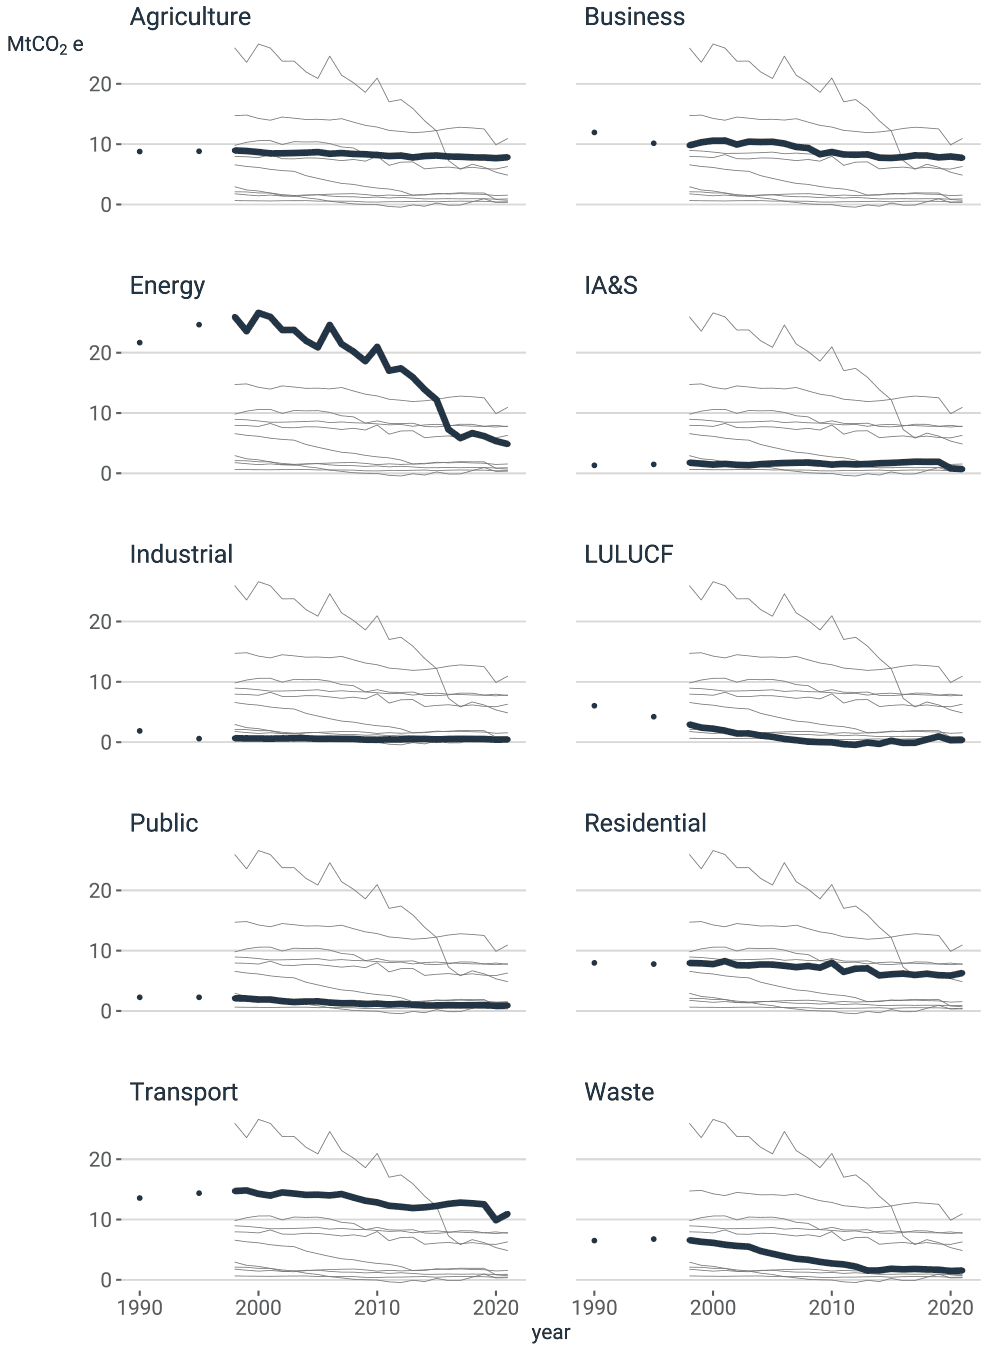 A series of line charts, one for each NC category. Each chart shows its category's time series in bold with the time series for the other categories also present but faded for comparison.